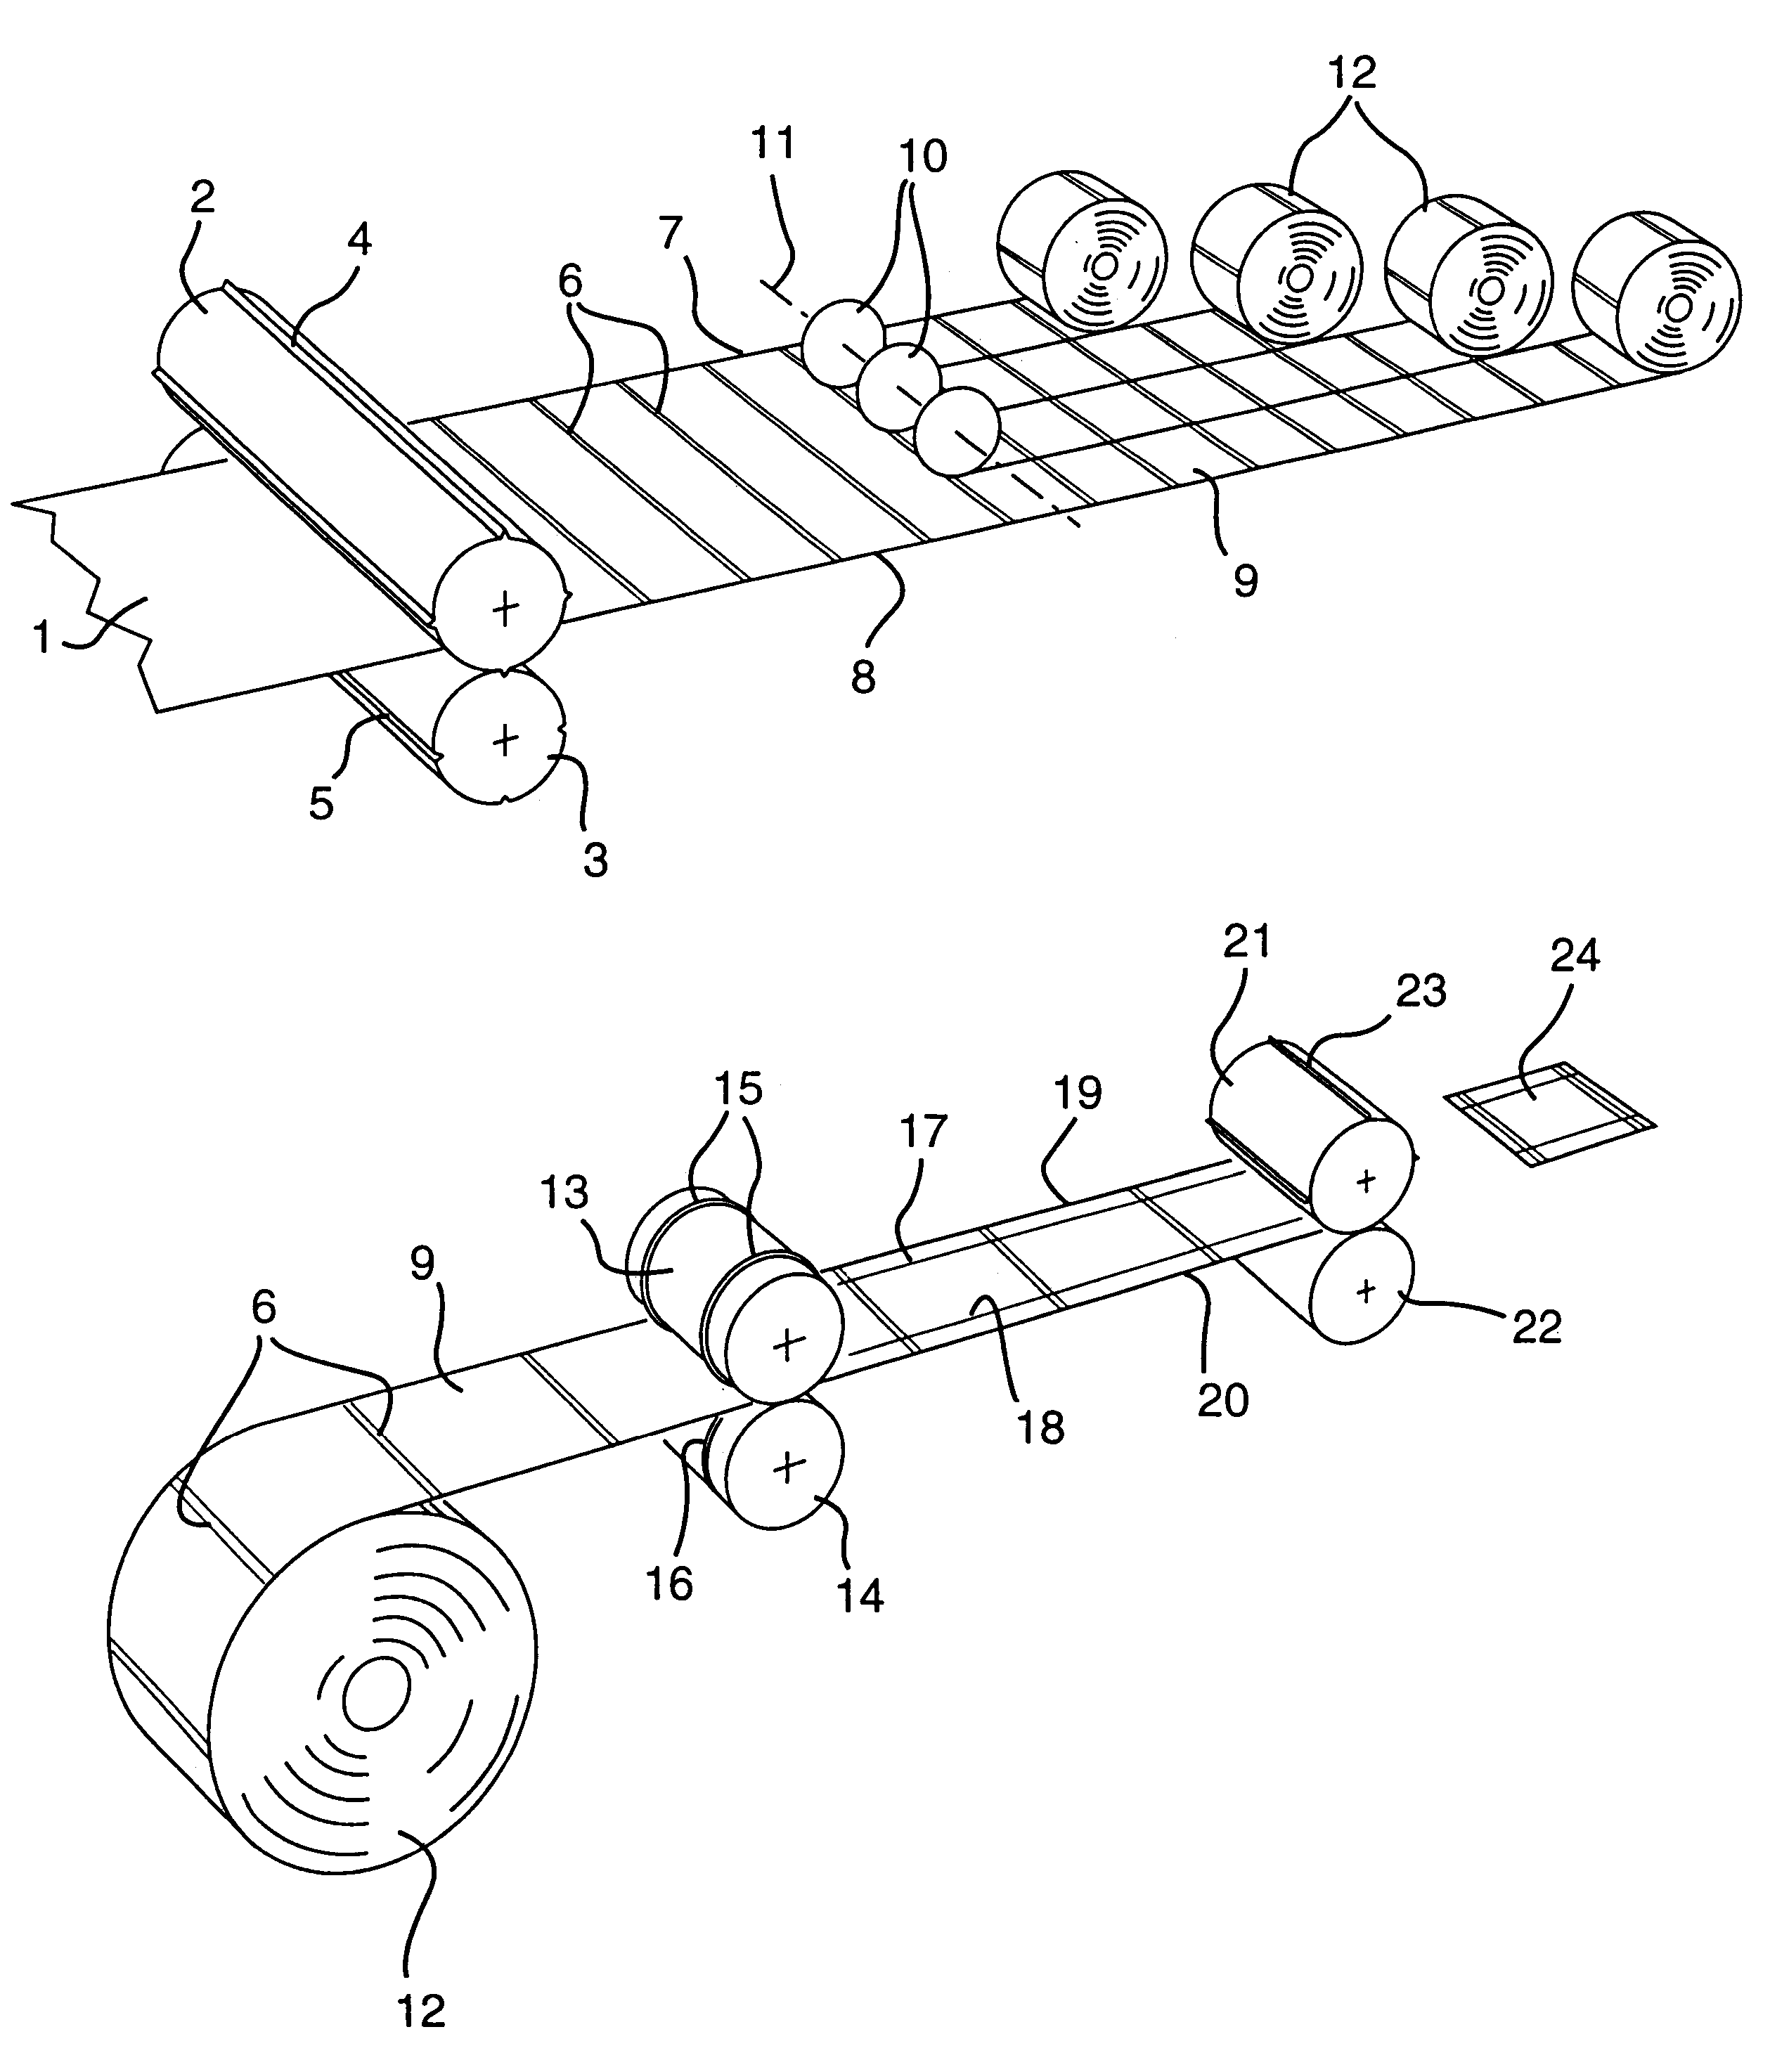 Method of producing crease-lined packaging material